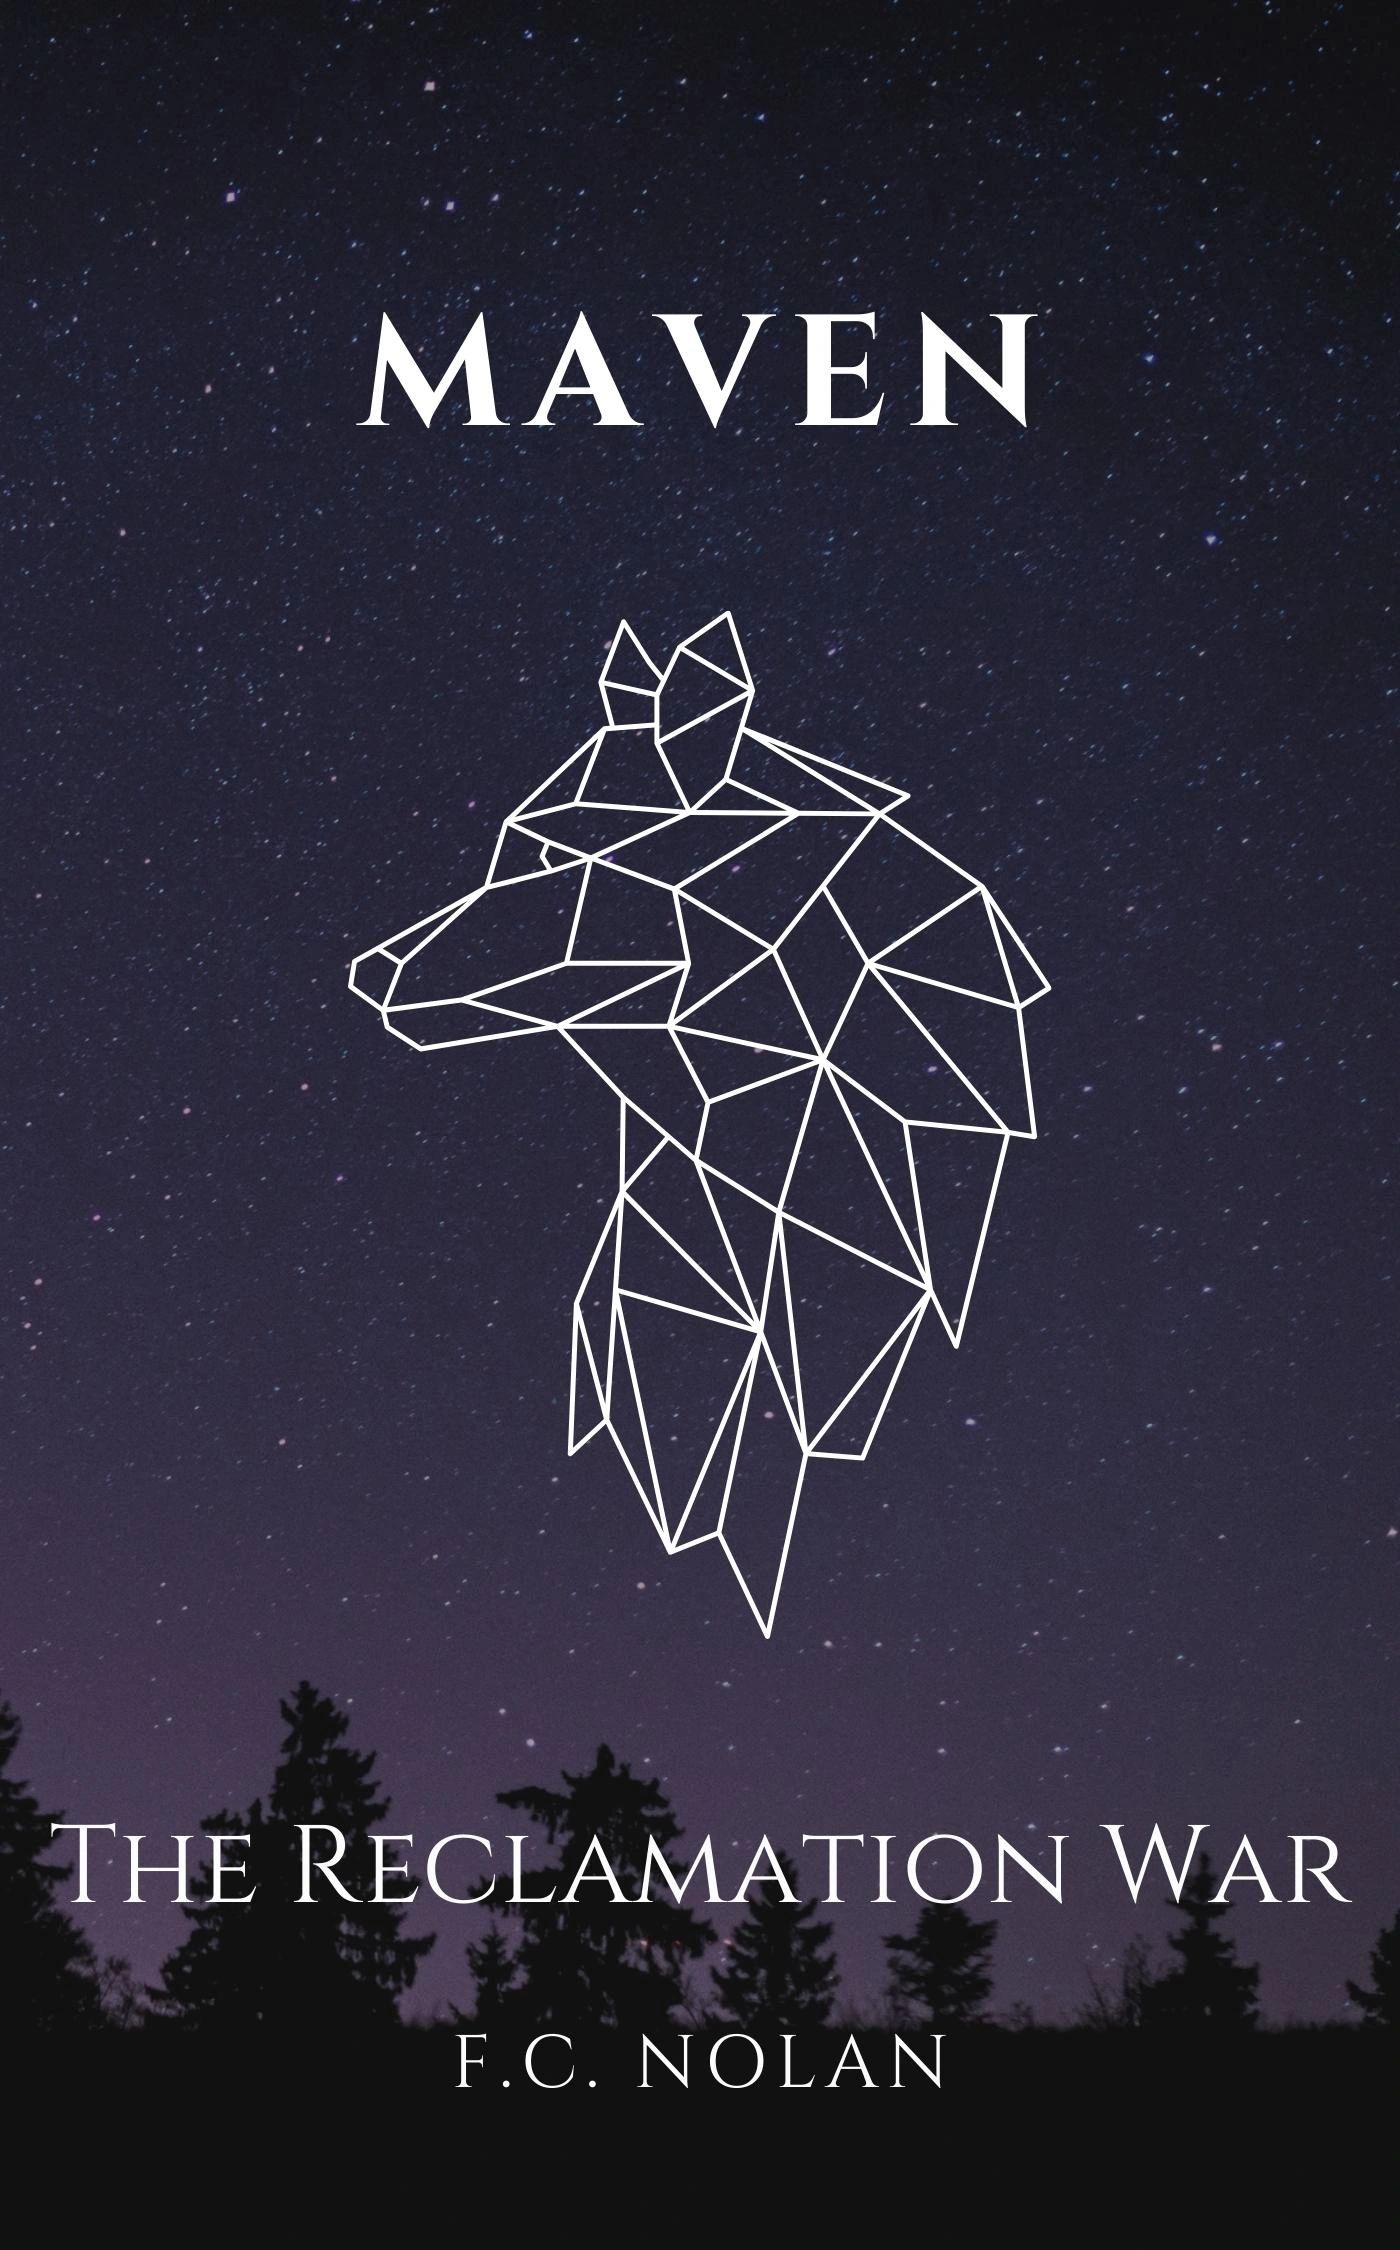 Wolf constellation in a starry night